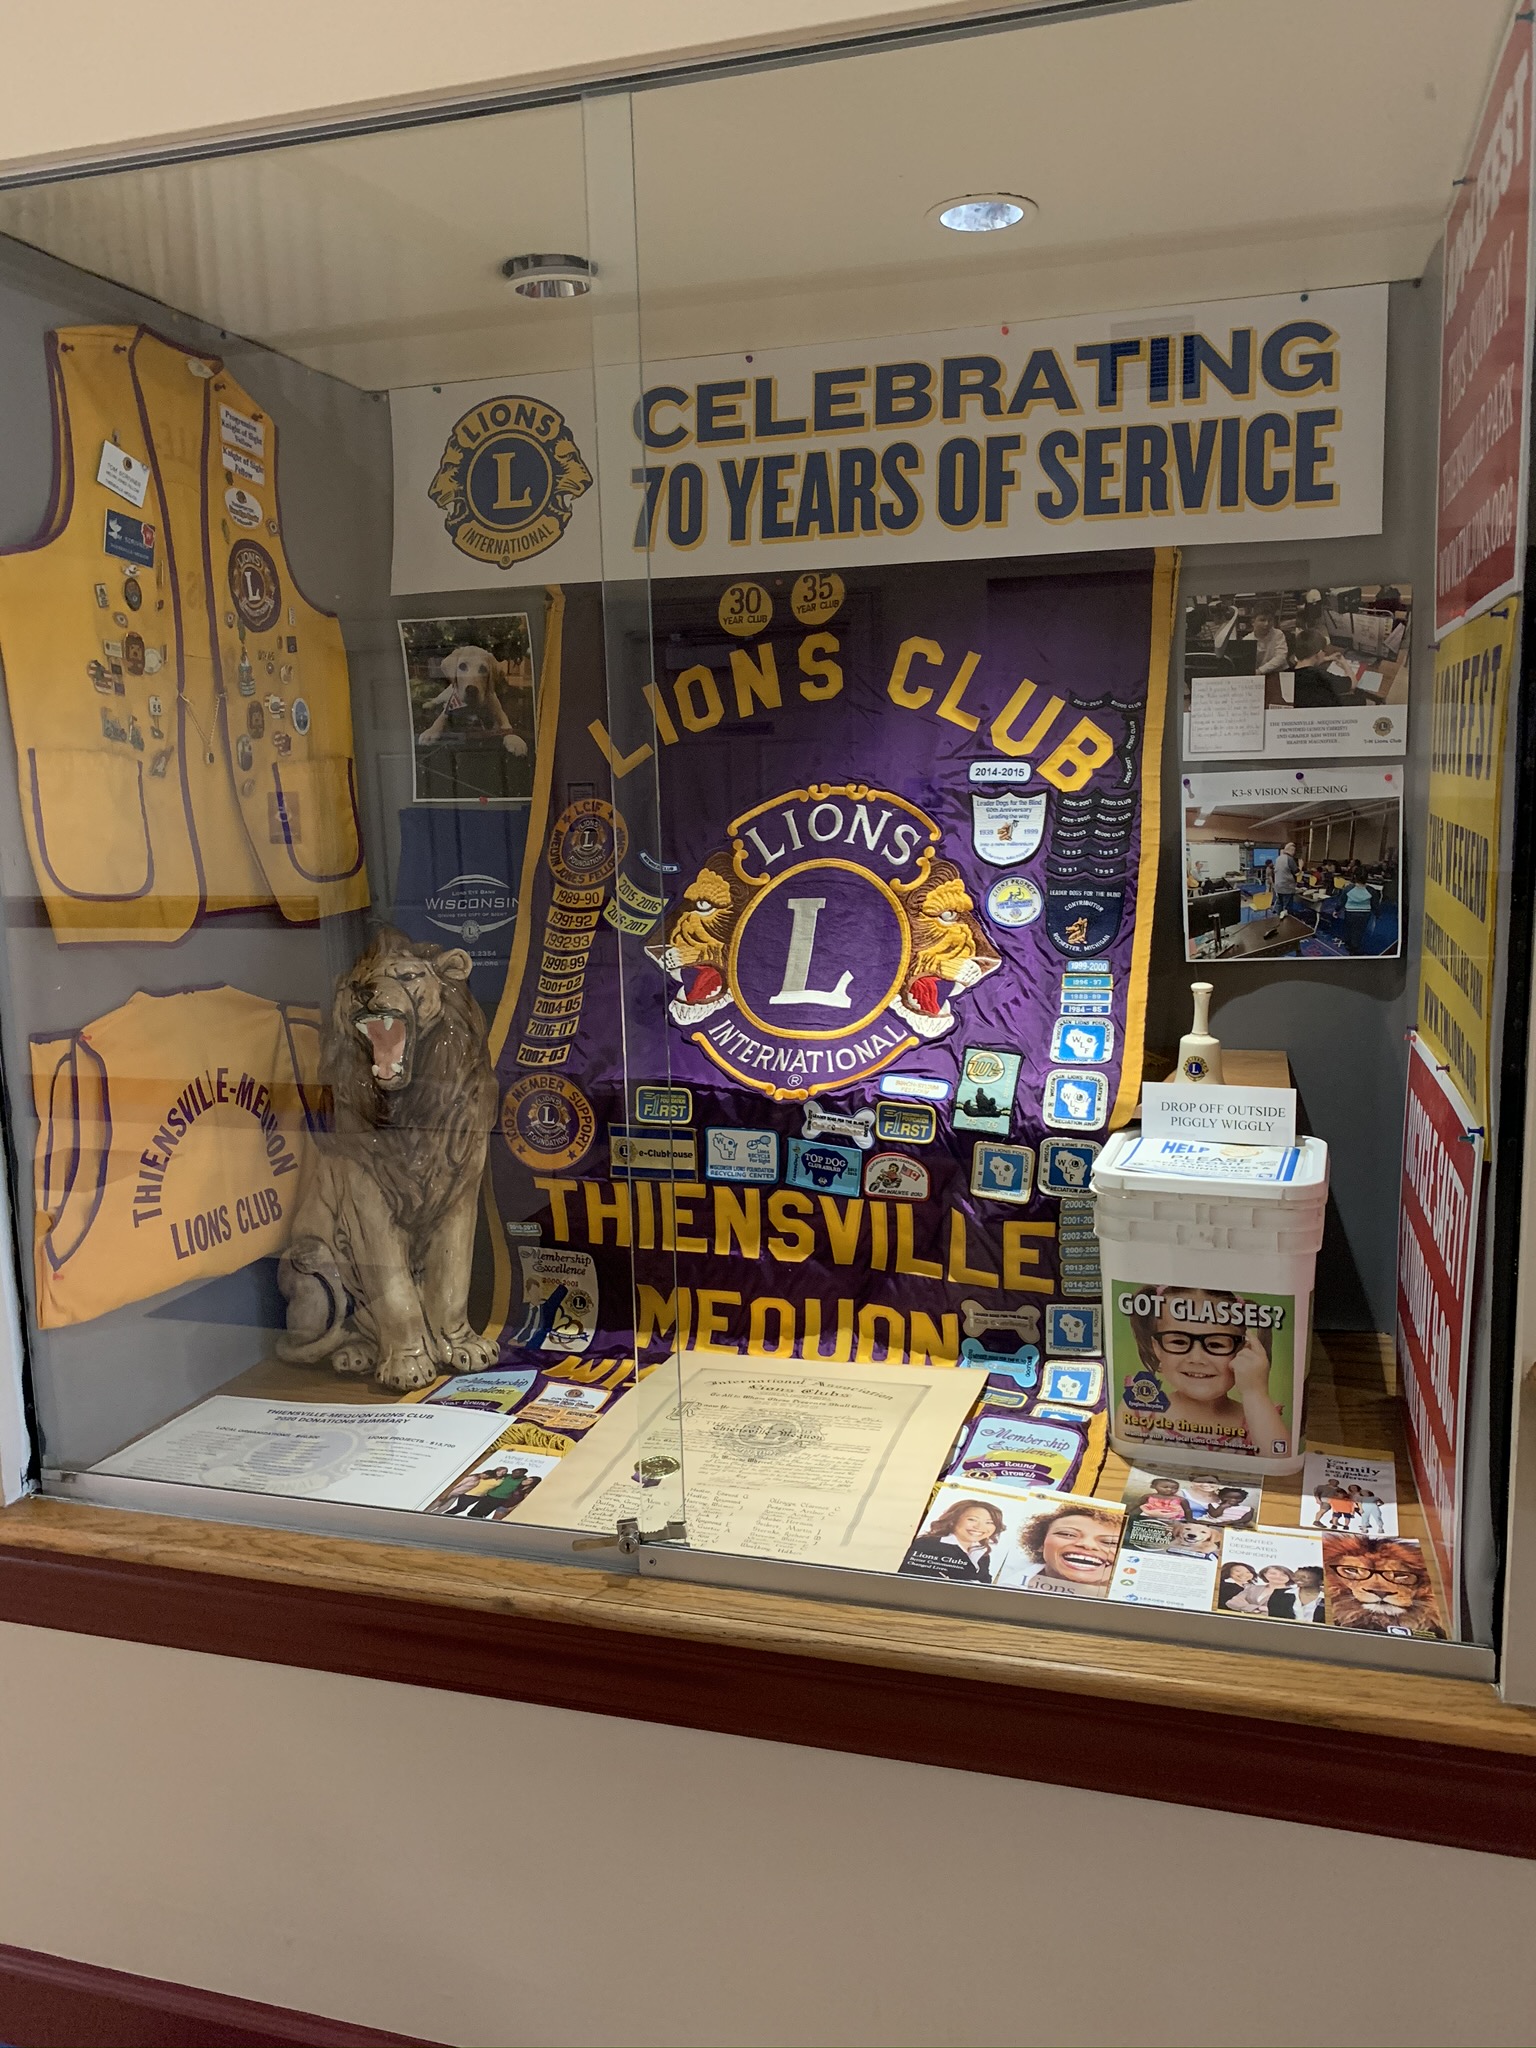 Celebrating 70 Years of Service